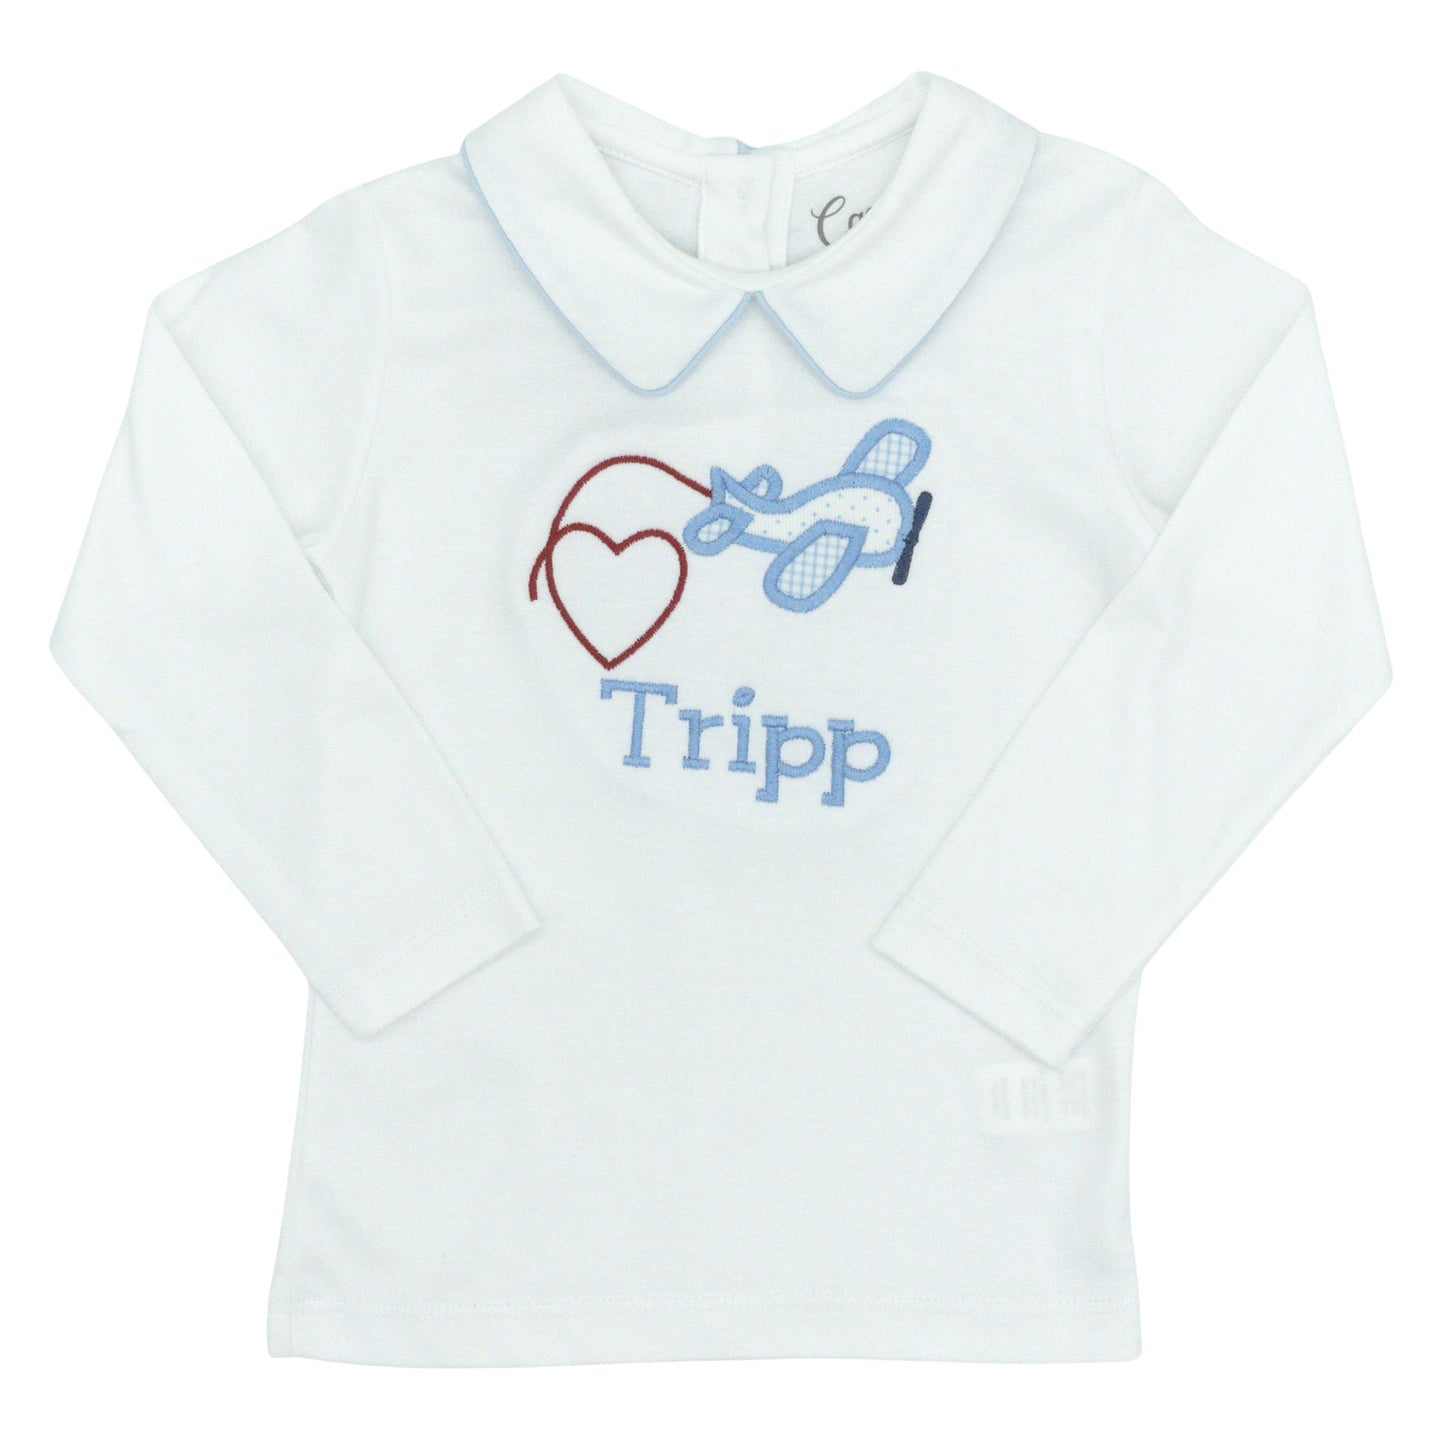 Plane with Heart Trail Appliqué with Name Monogram Design